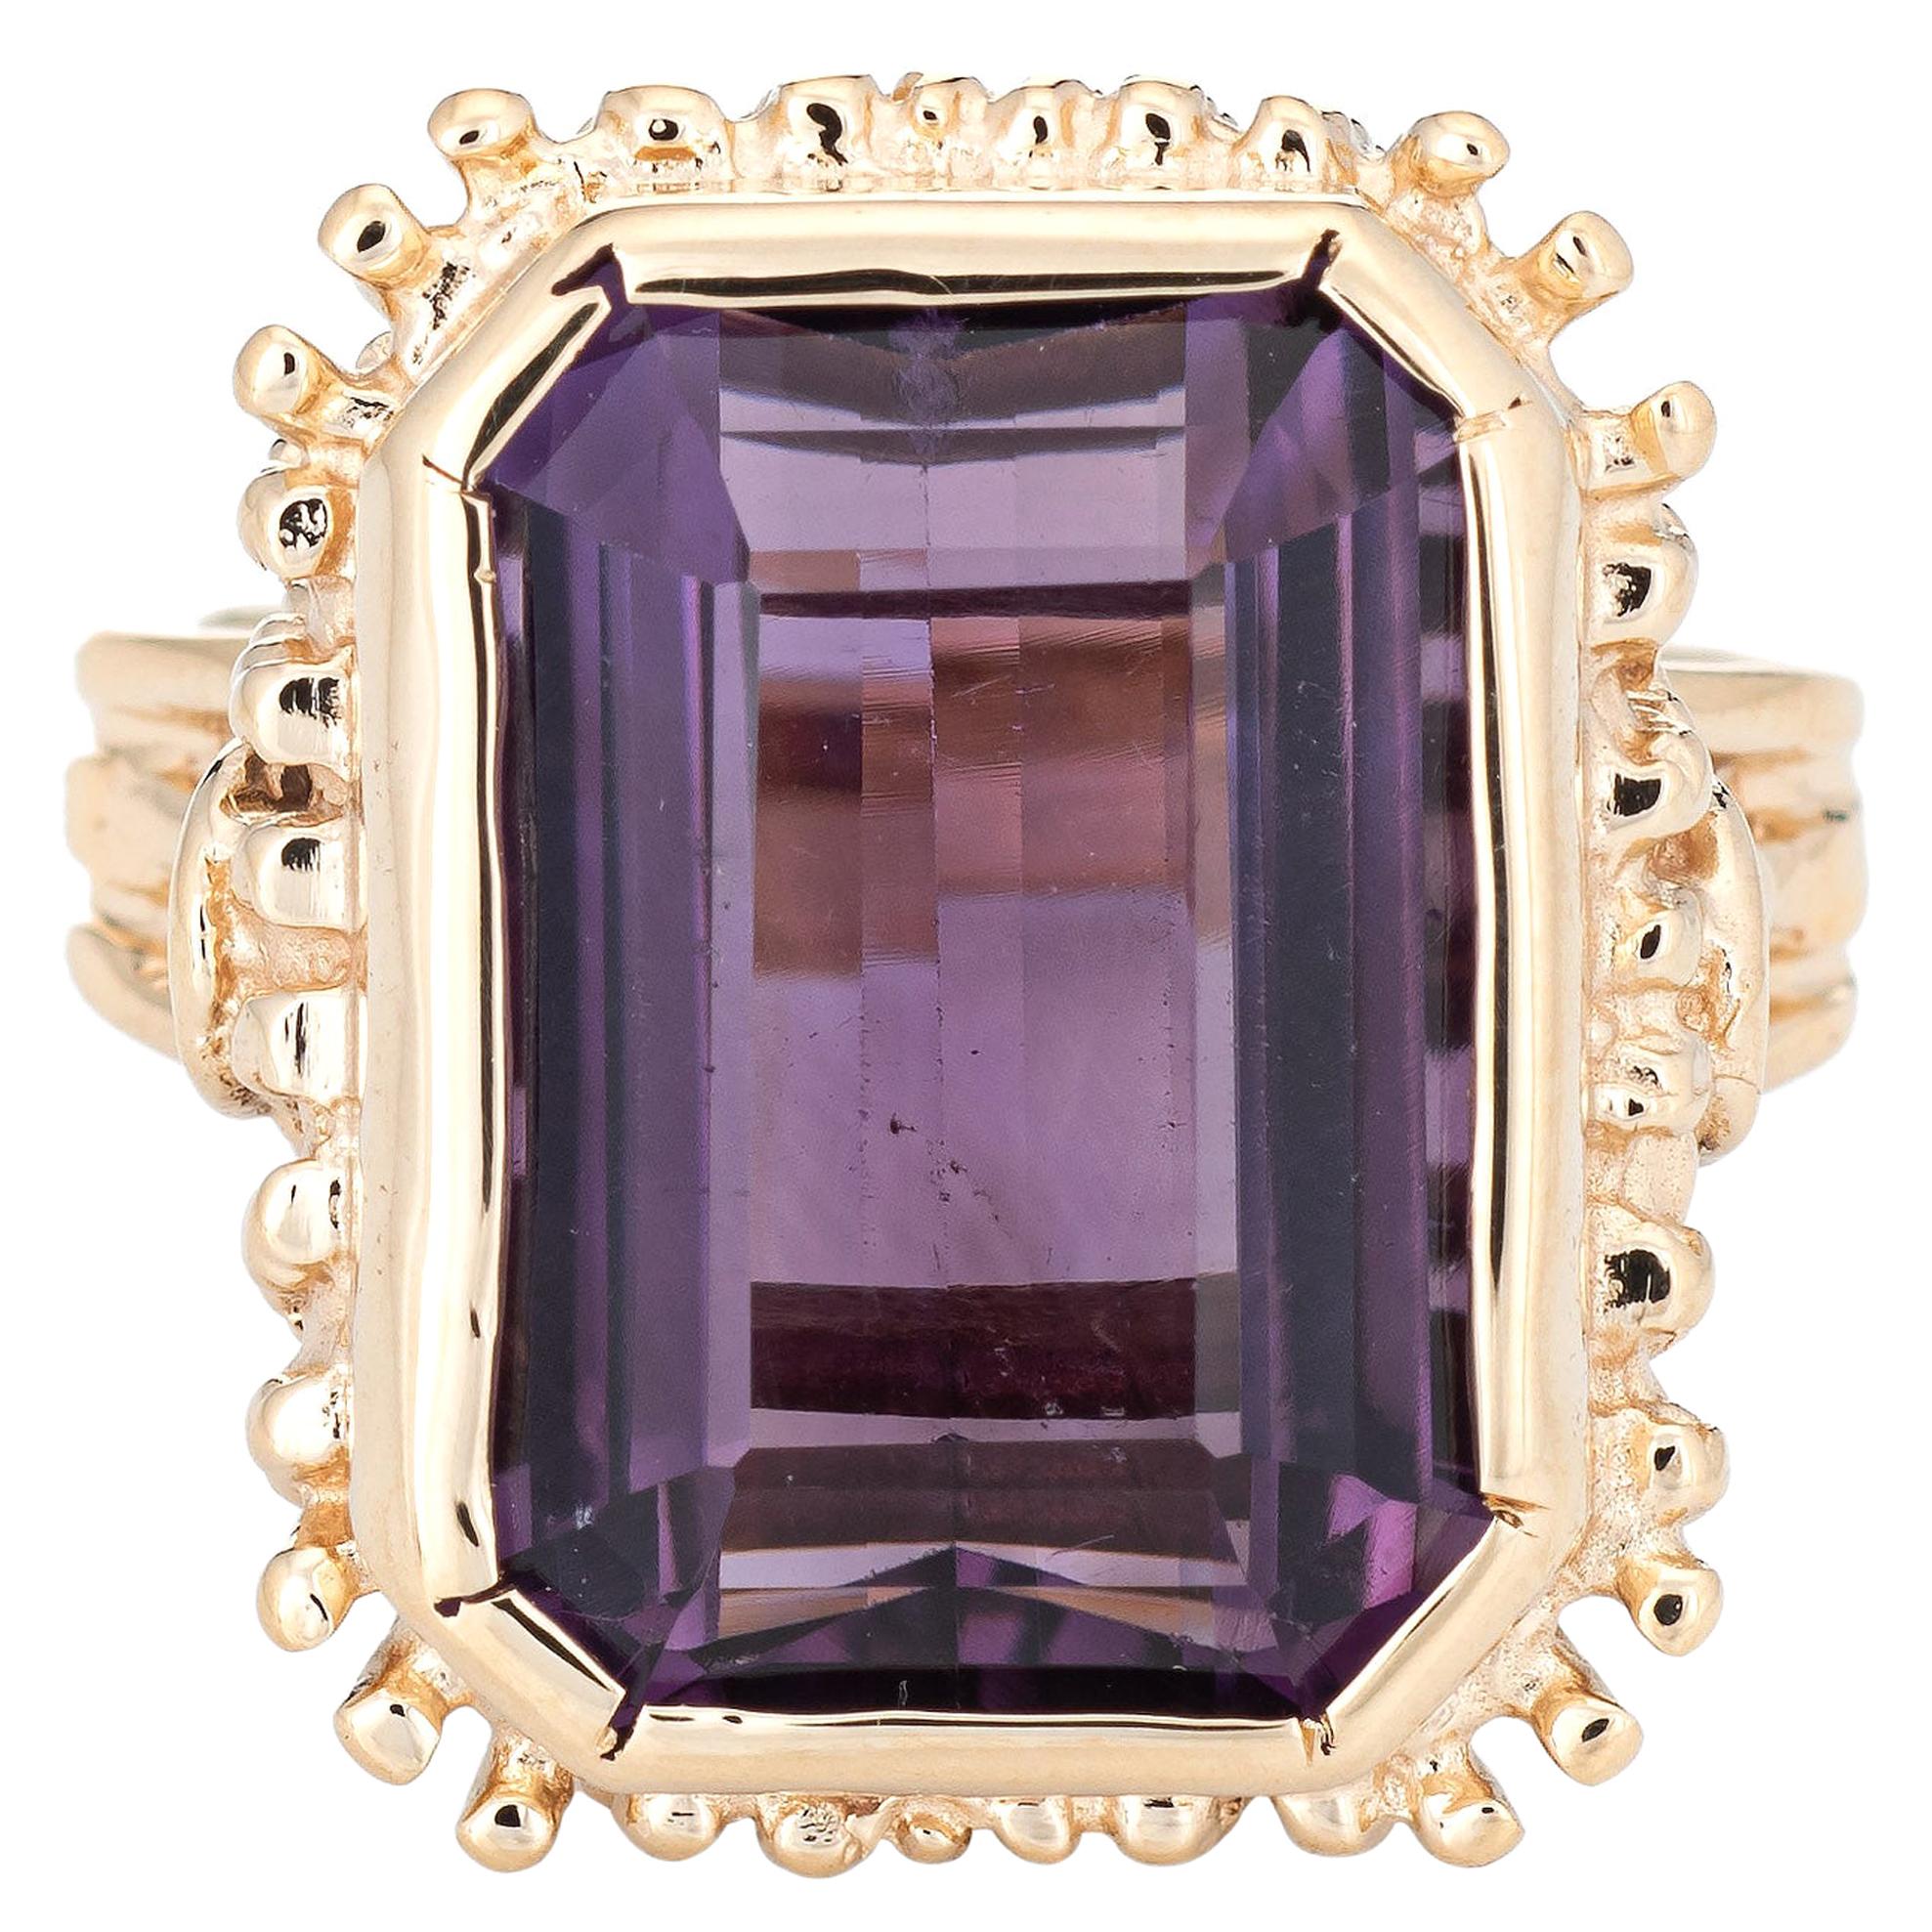 9ct Square Amethyst Ring Vintage 14k Yellow Gold Cocktail Estate Fine Jewelry 8